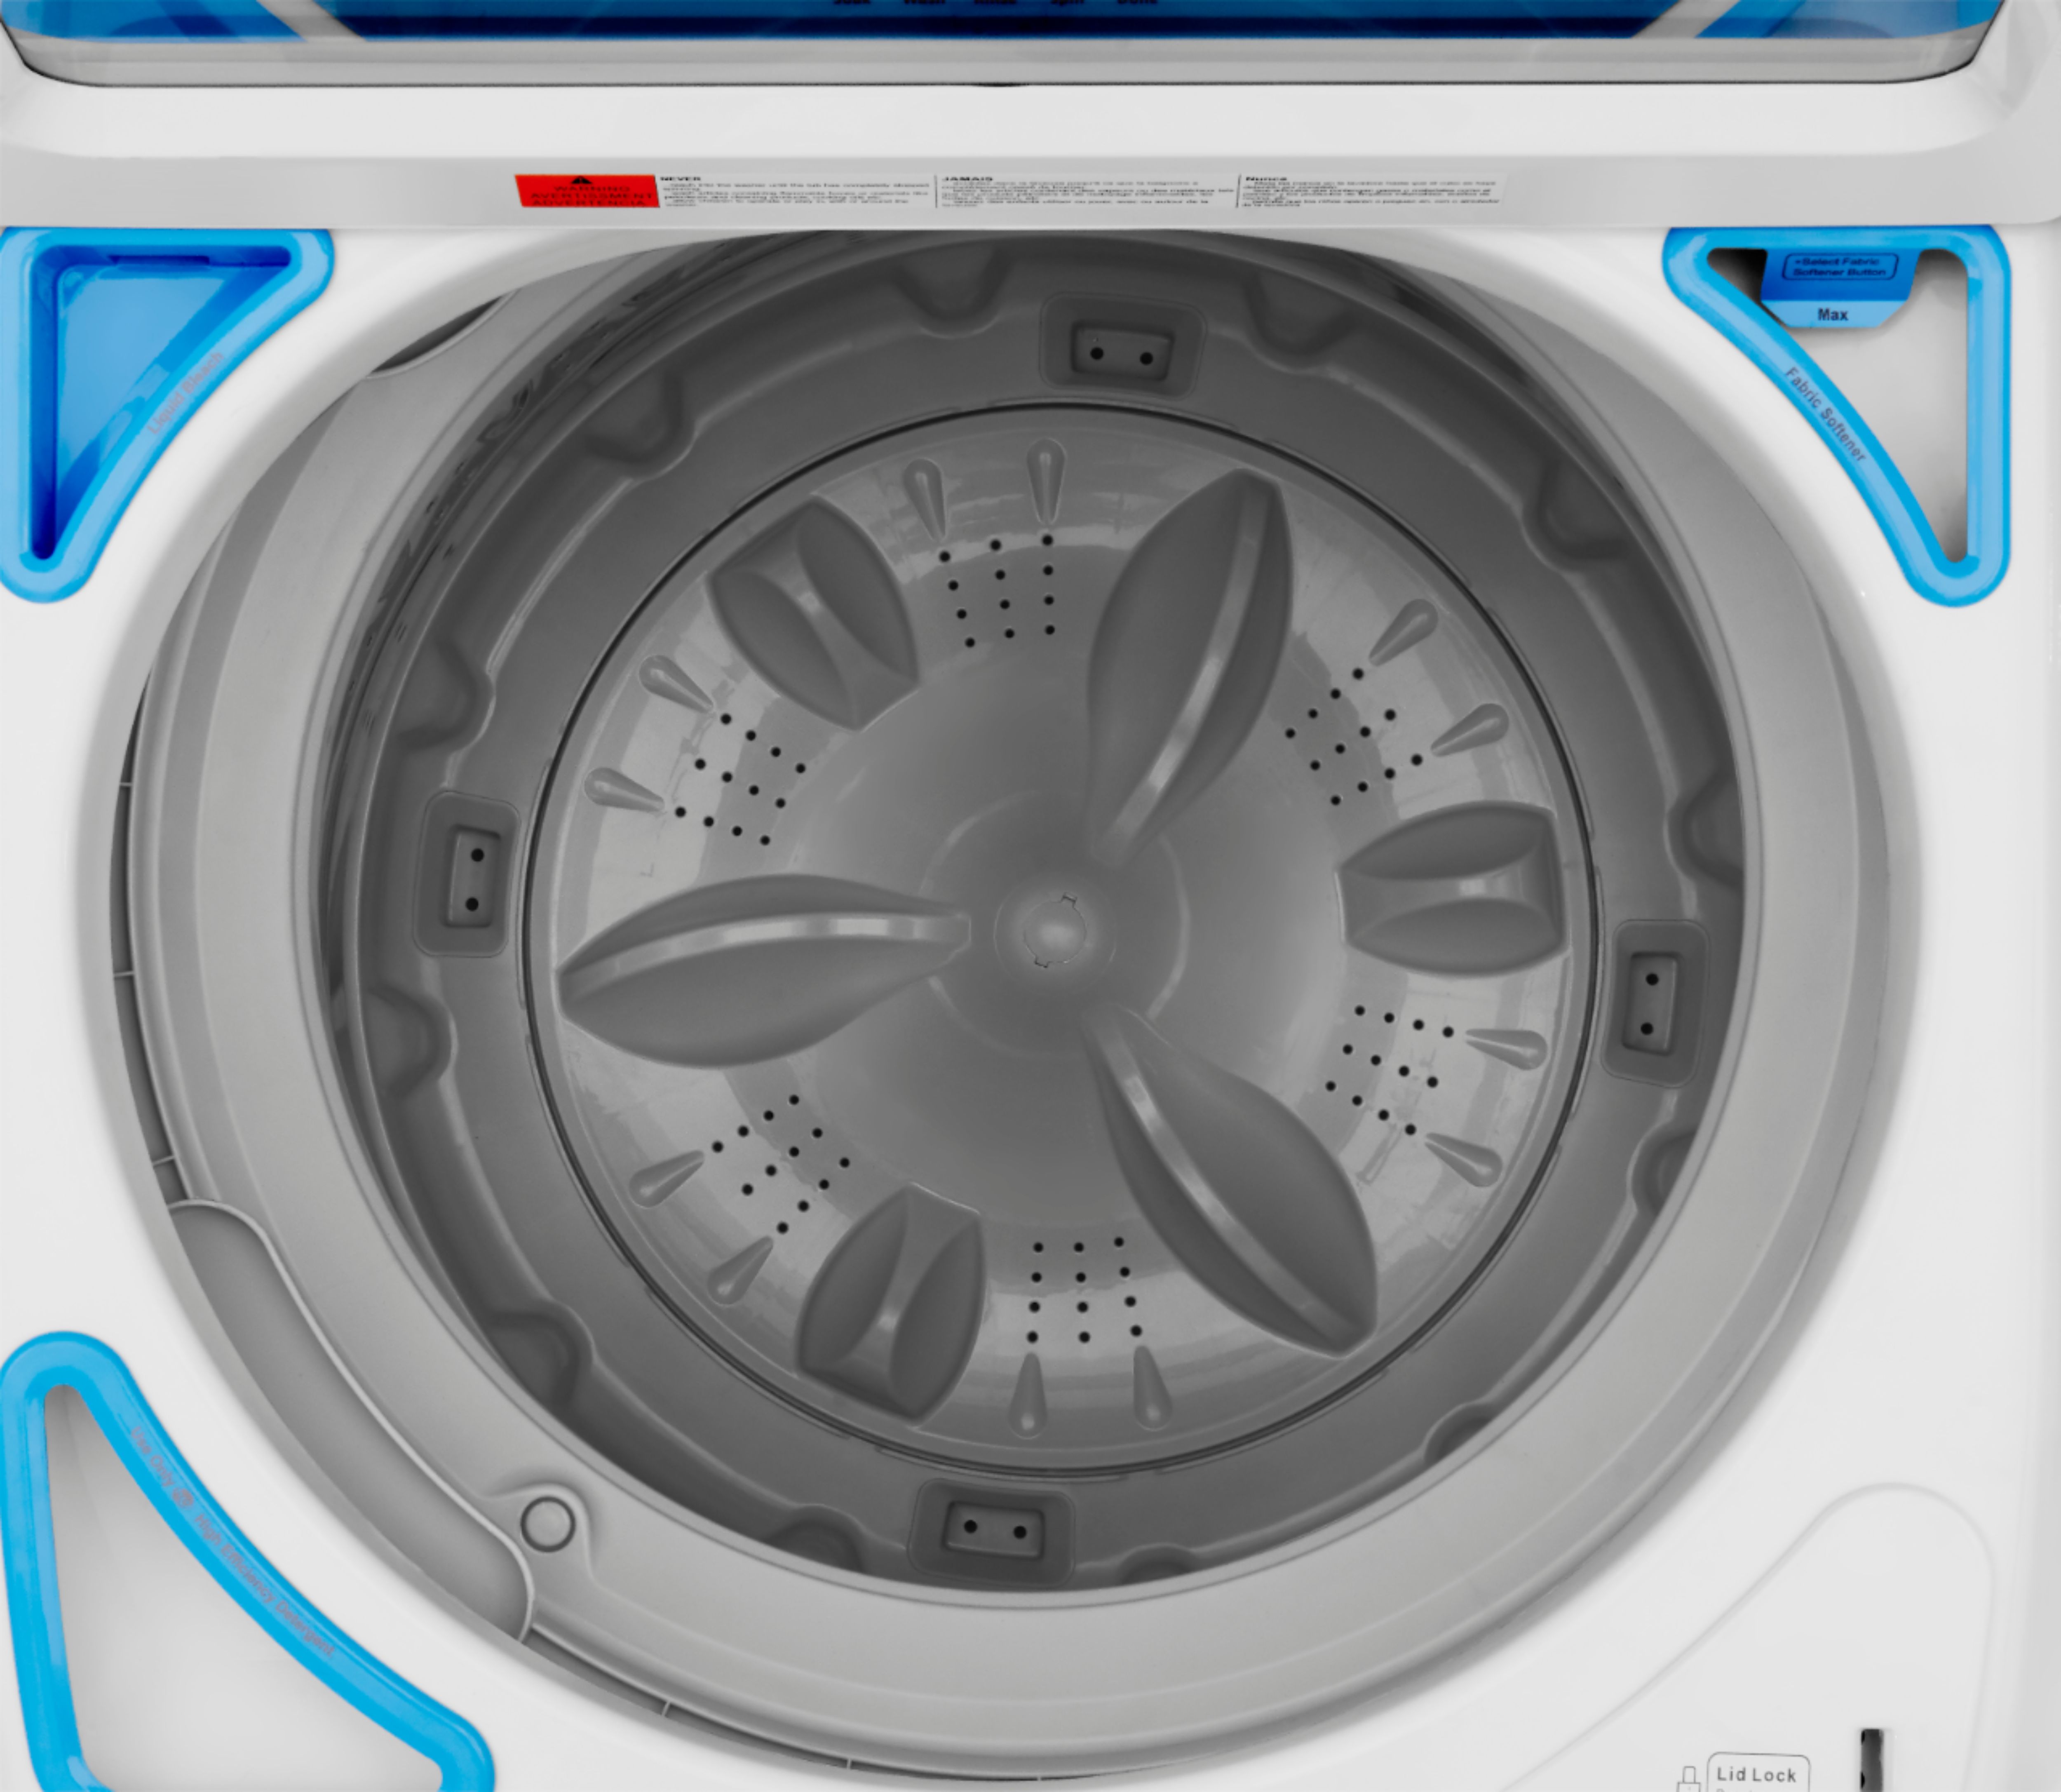 Insignia - 4.5 Cu. ft. High-Efficiency Front Load Washer - White